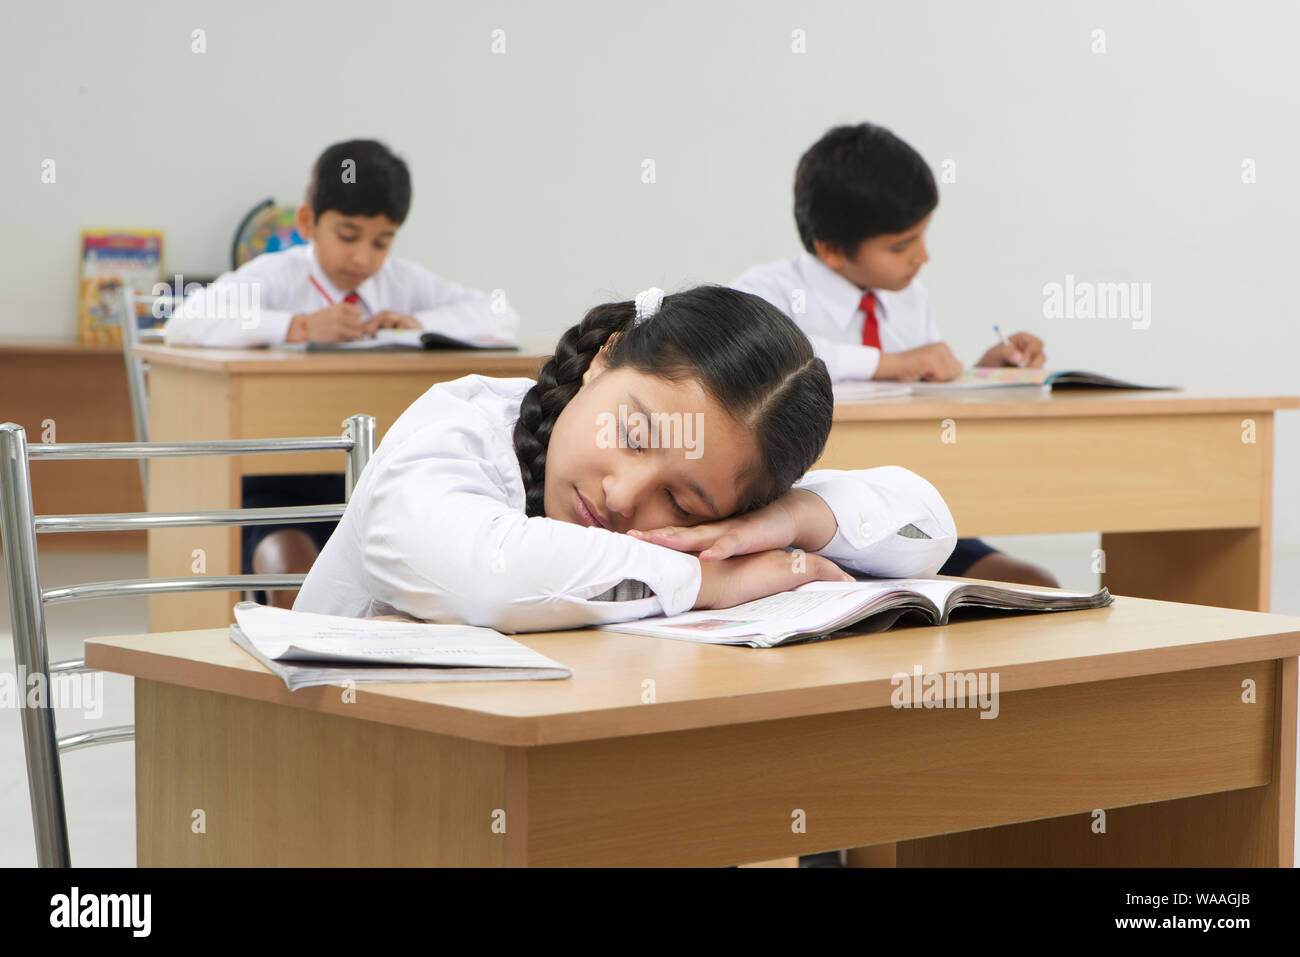 Girl sleeping in classroom rest of students studying Stock Photo